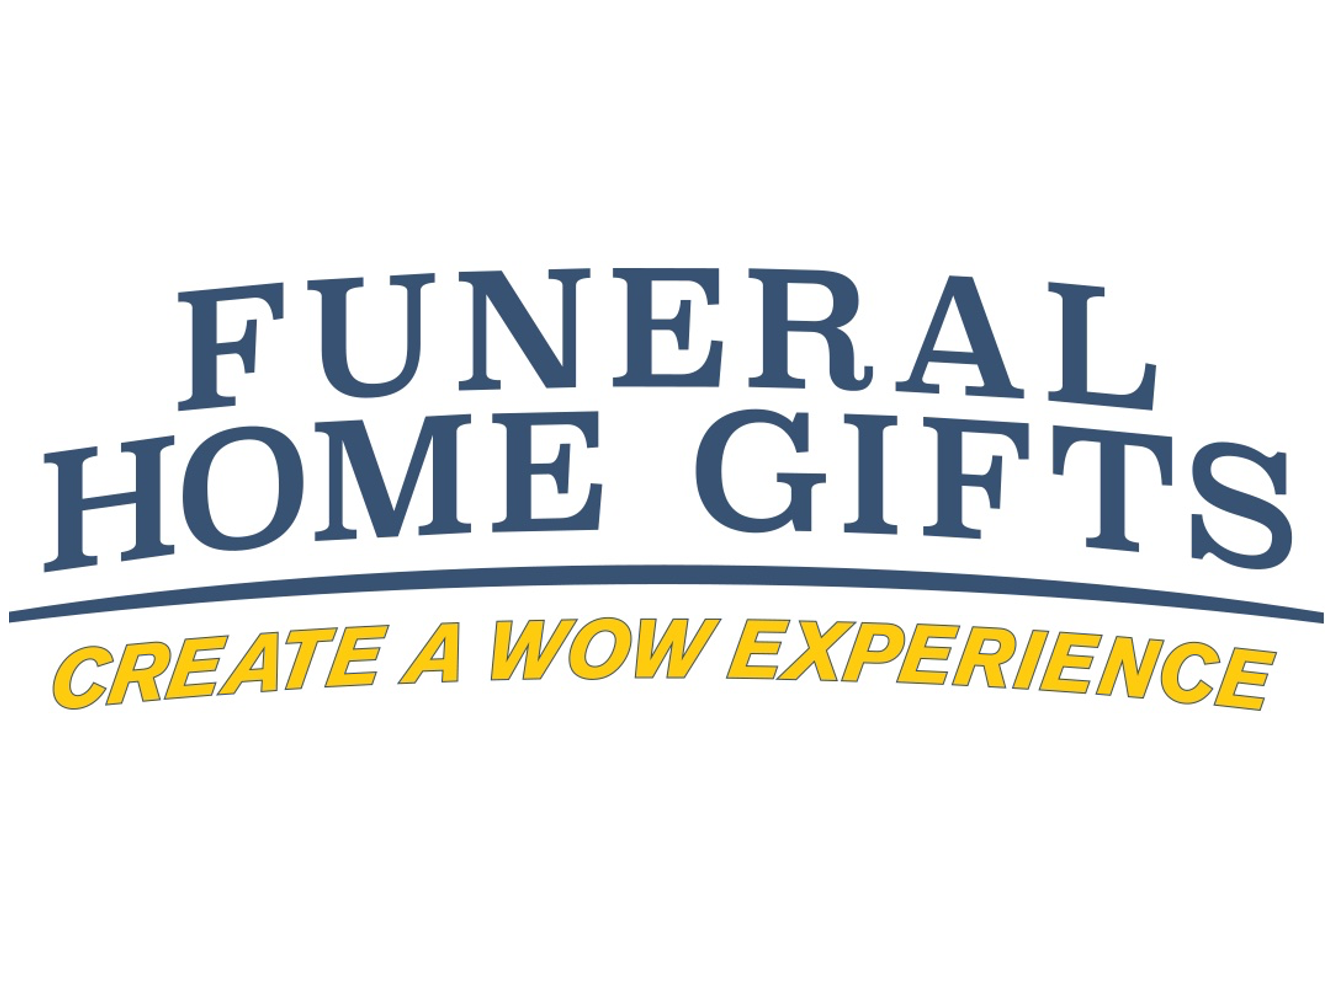 Funeral Home Gifts